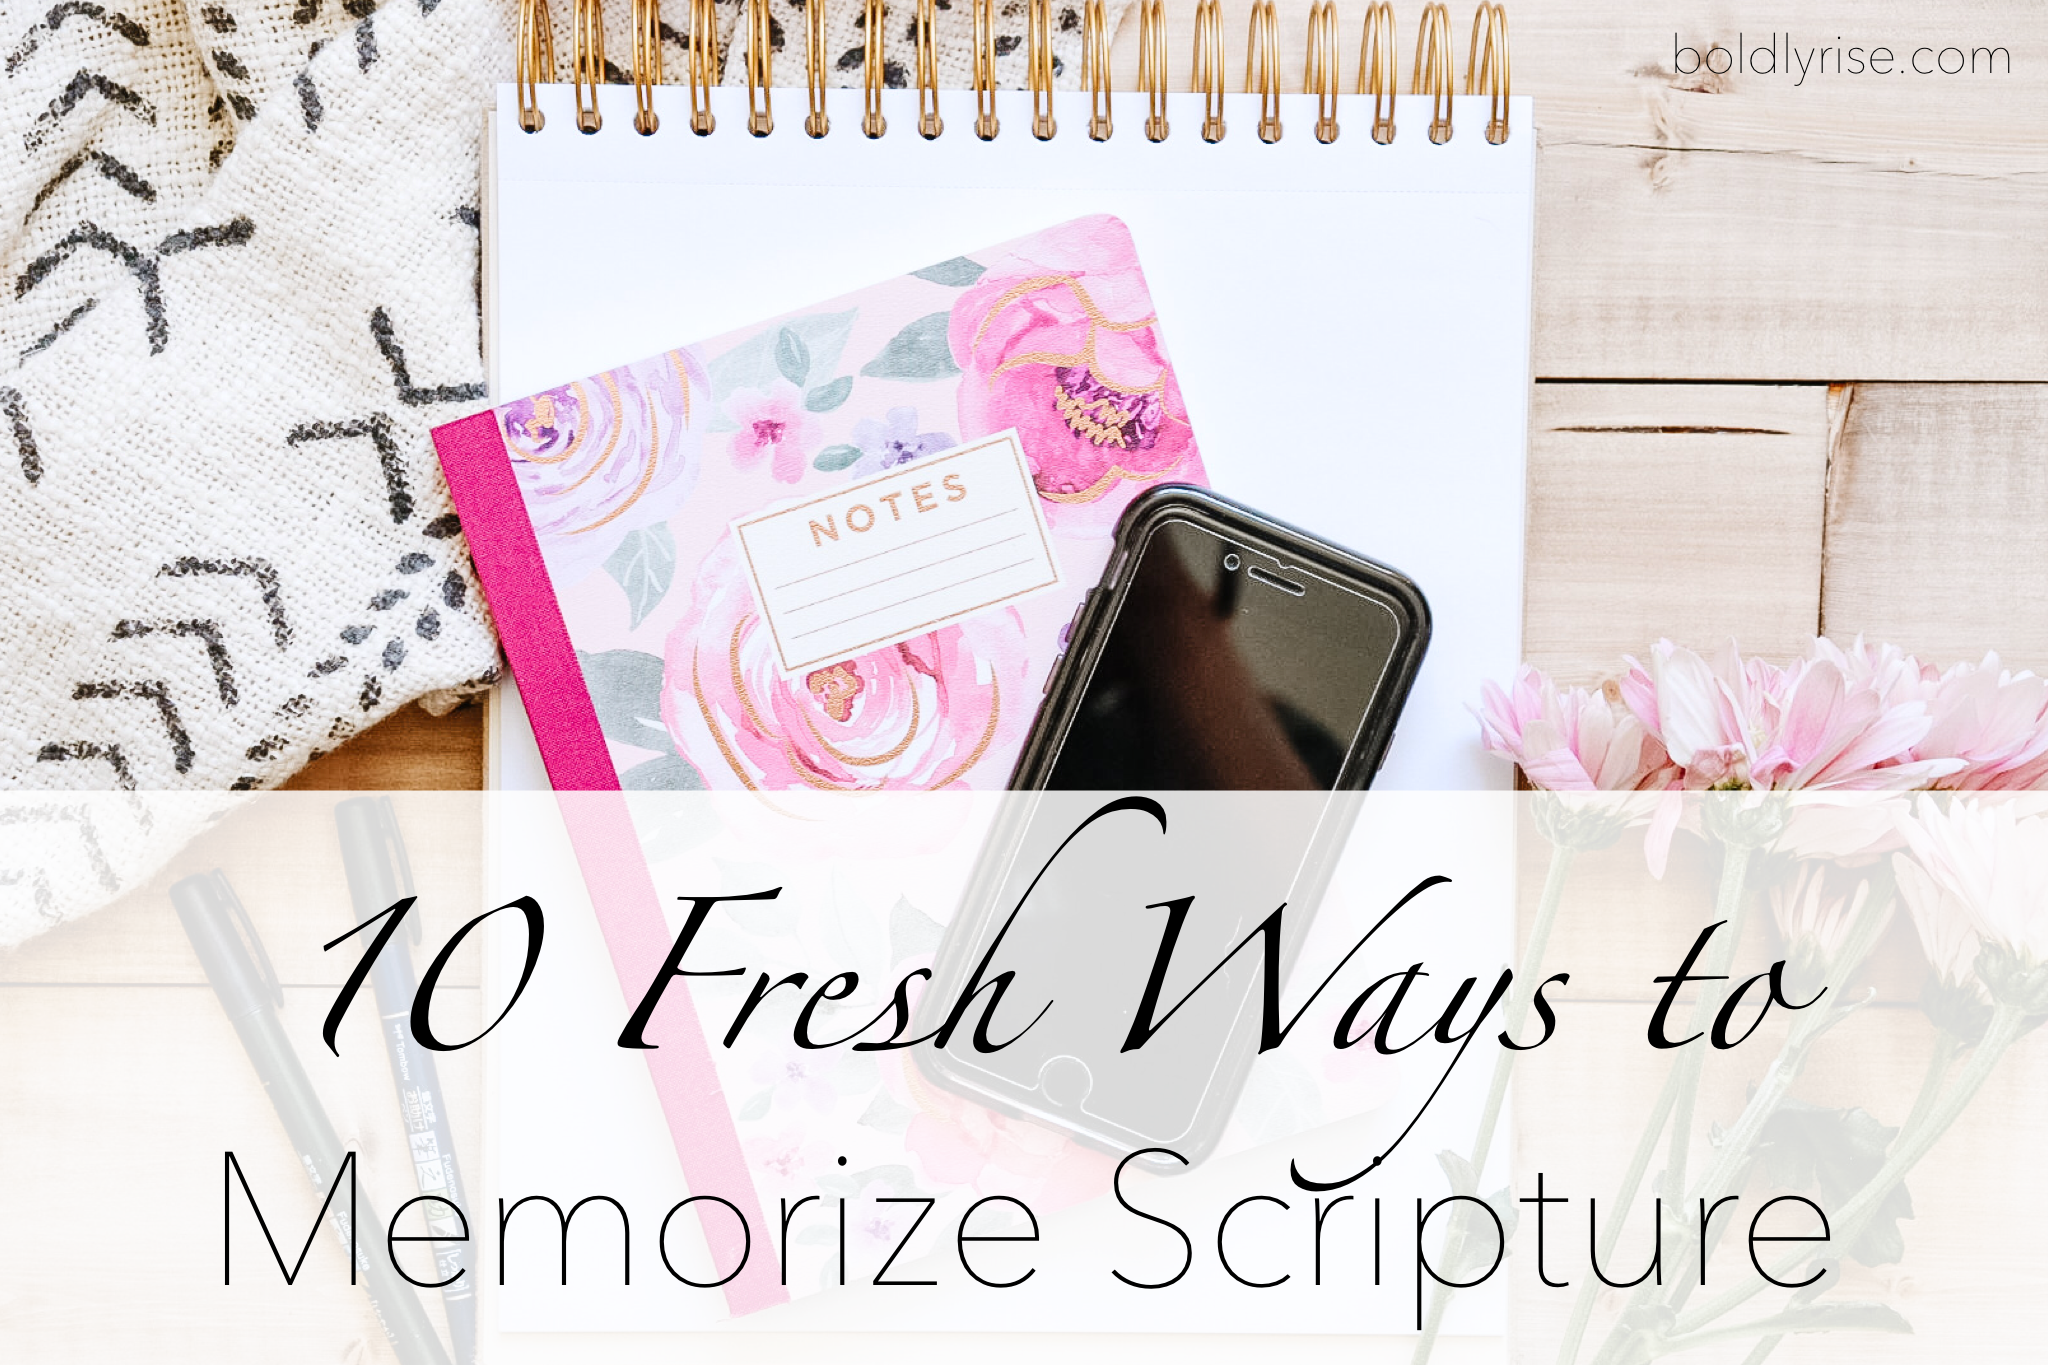 fresh ways to memorize scripture front image with notebook and phone